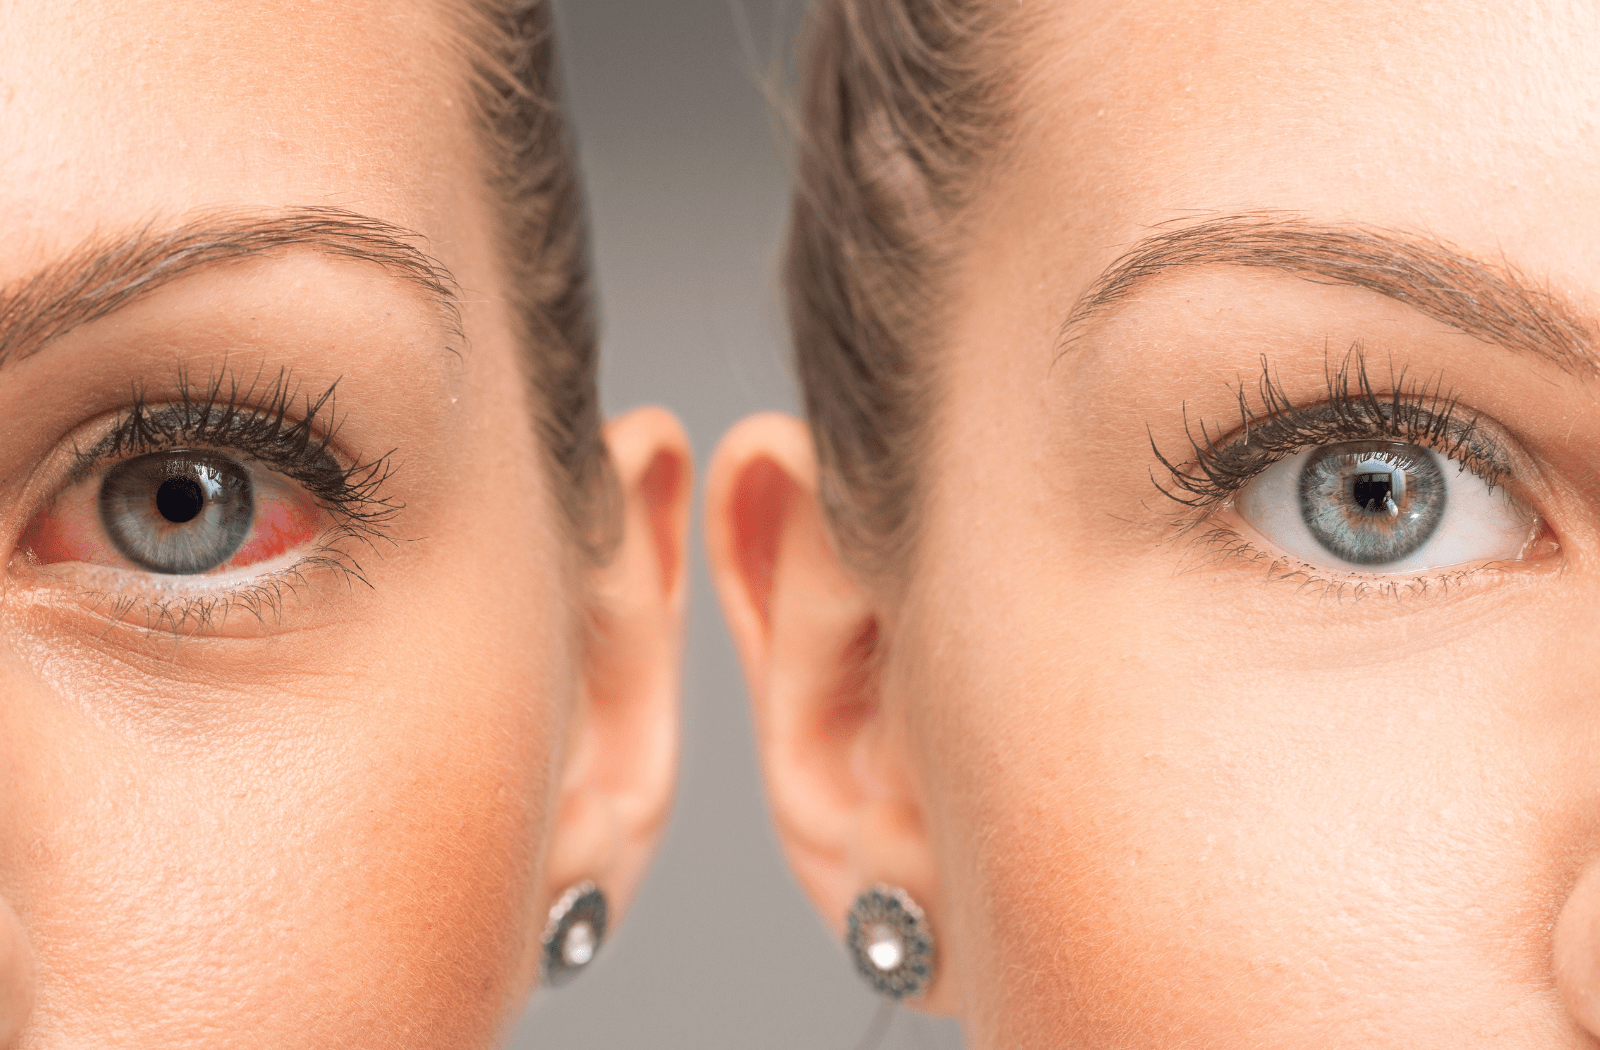 A comparison between a woman's healthy eye and a woman's red and dry eye